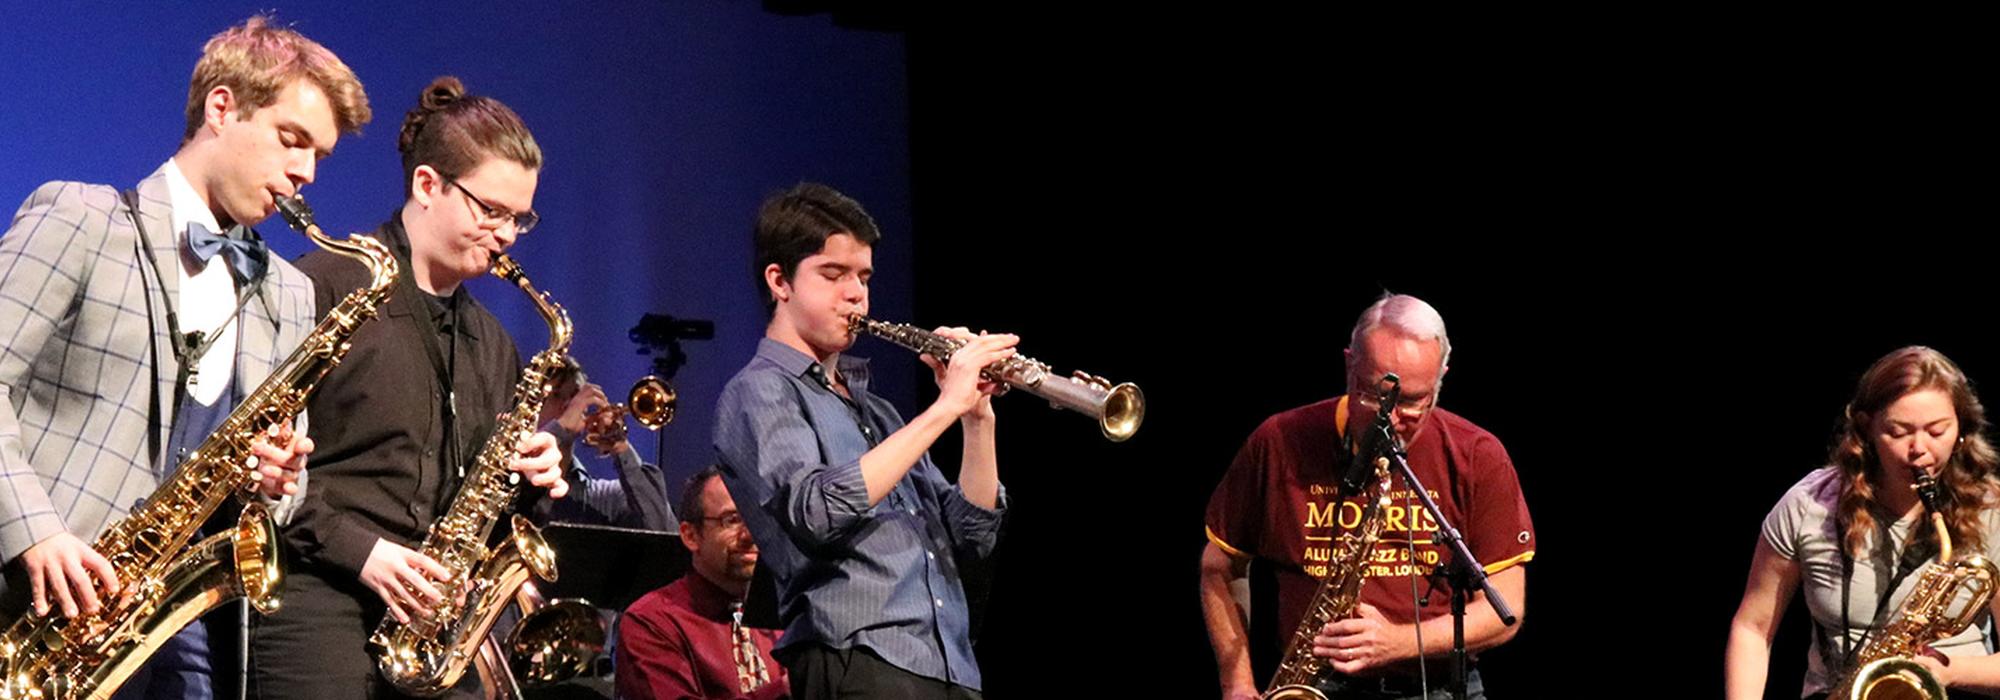 Jazz group performing on stage